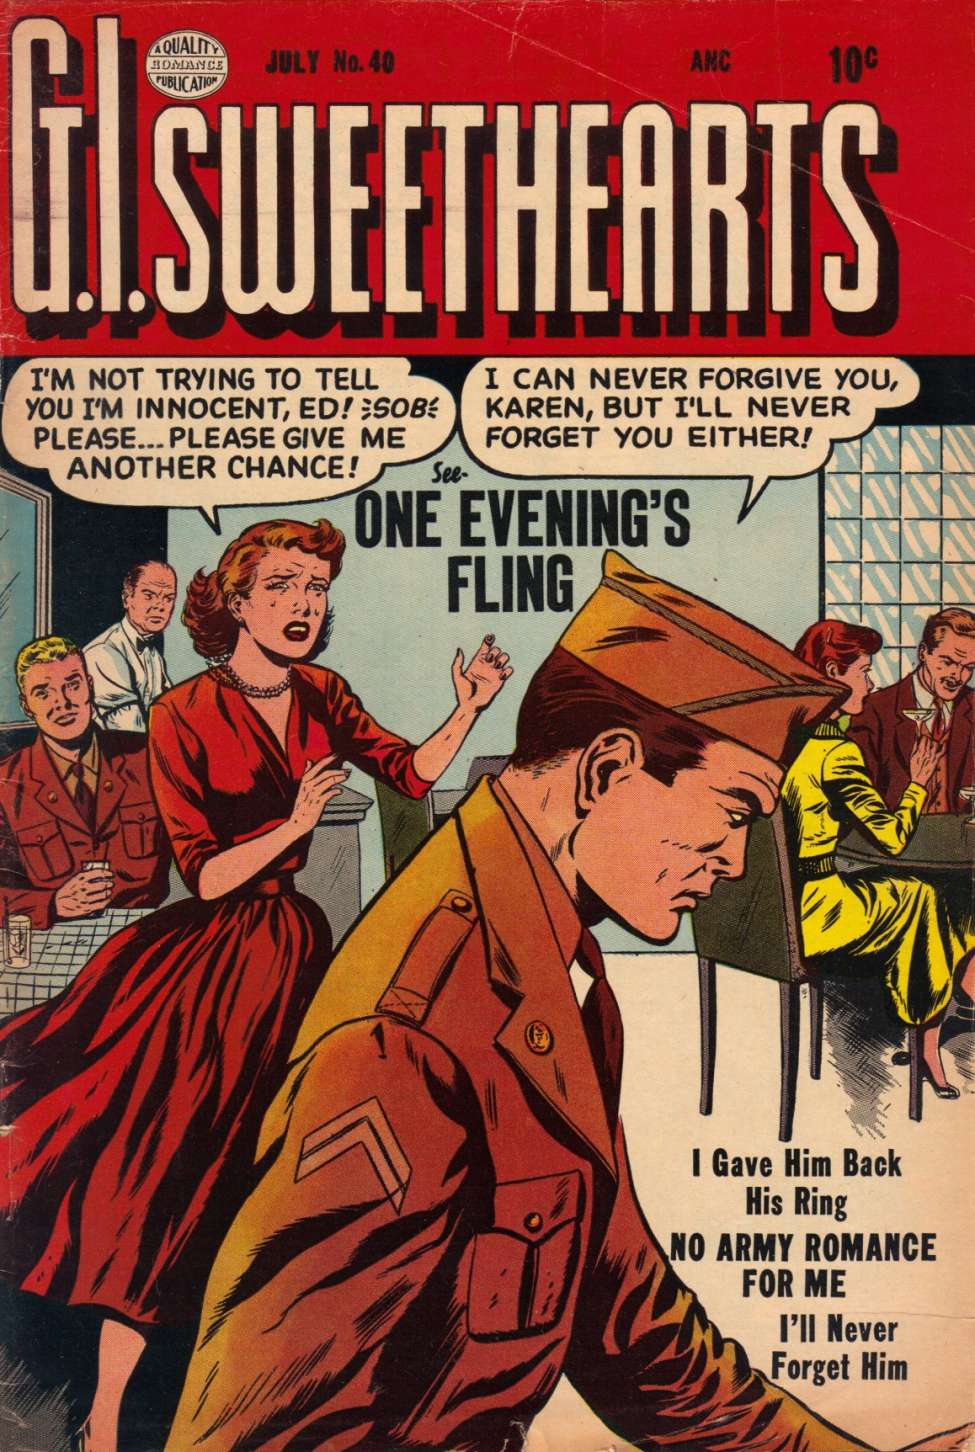 Comic Book Cover For G.I. Sweethearts 40